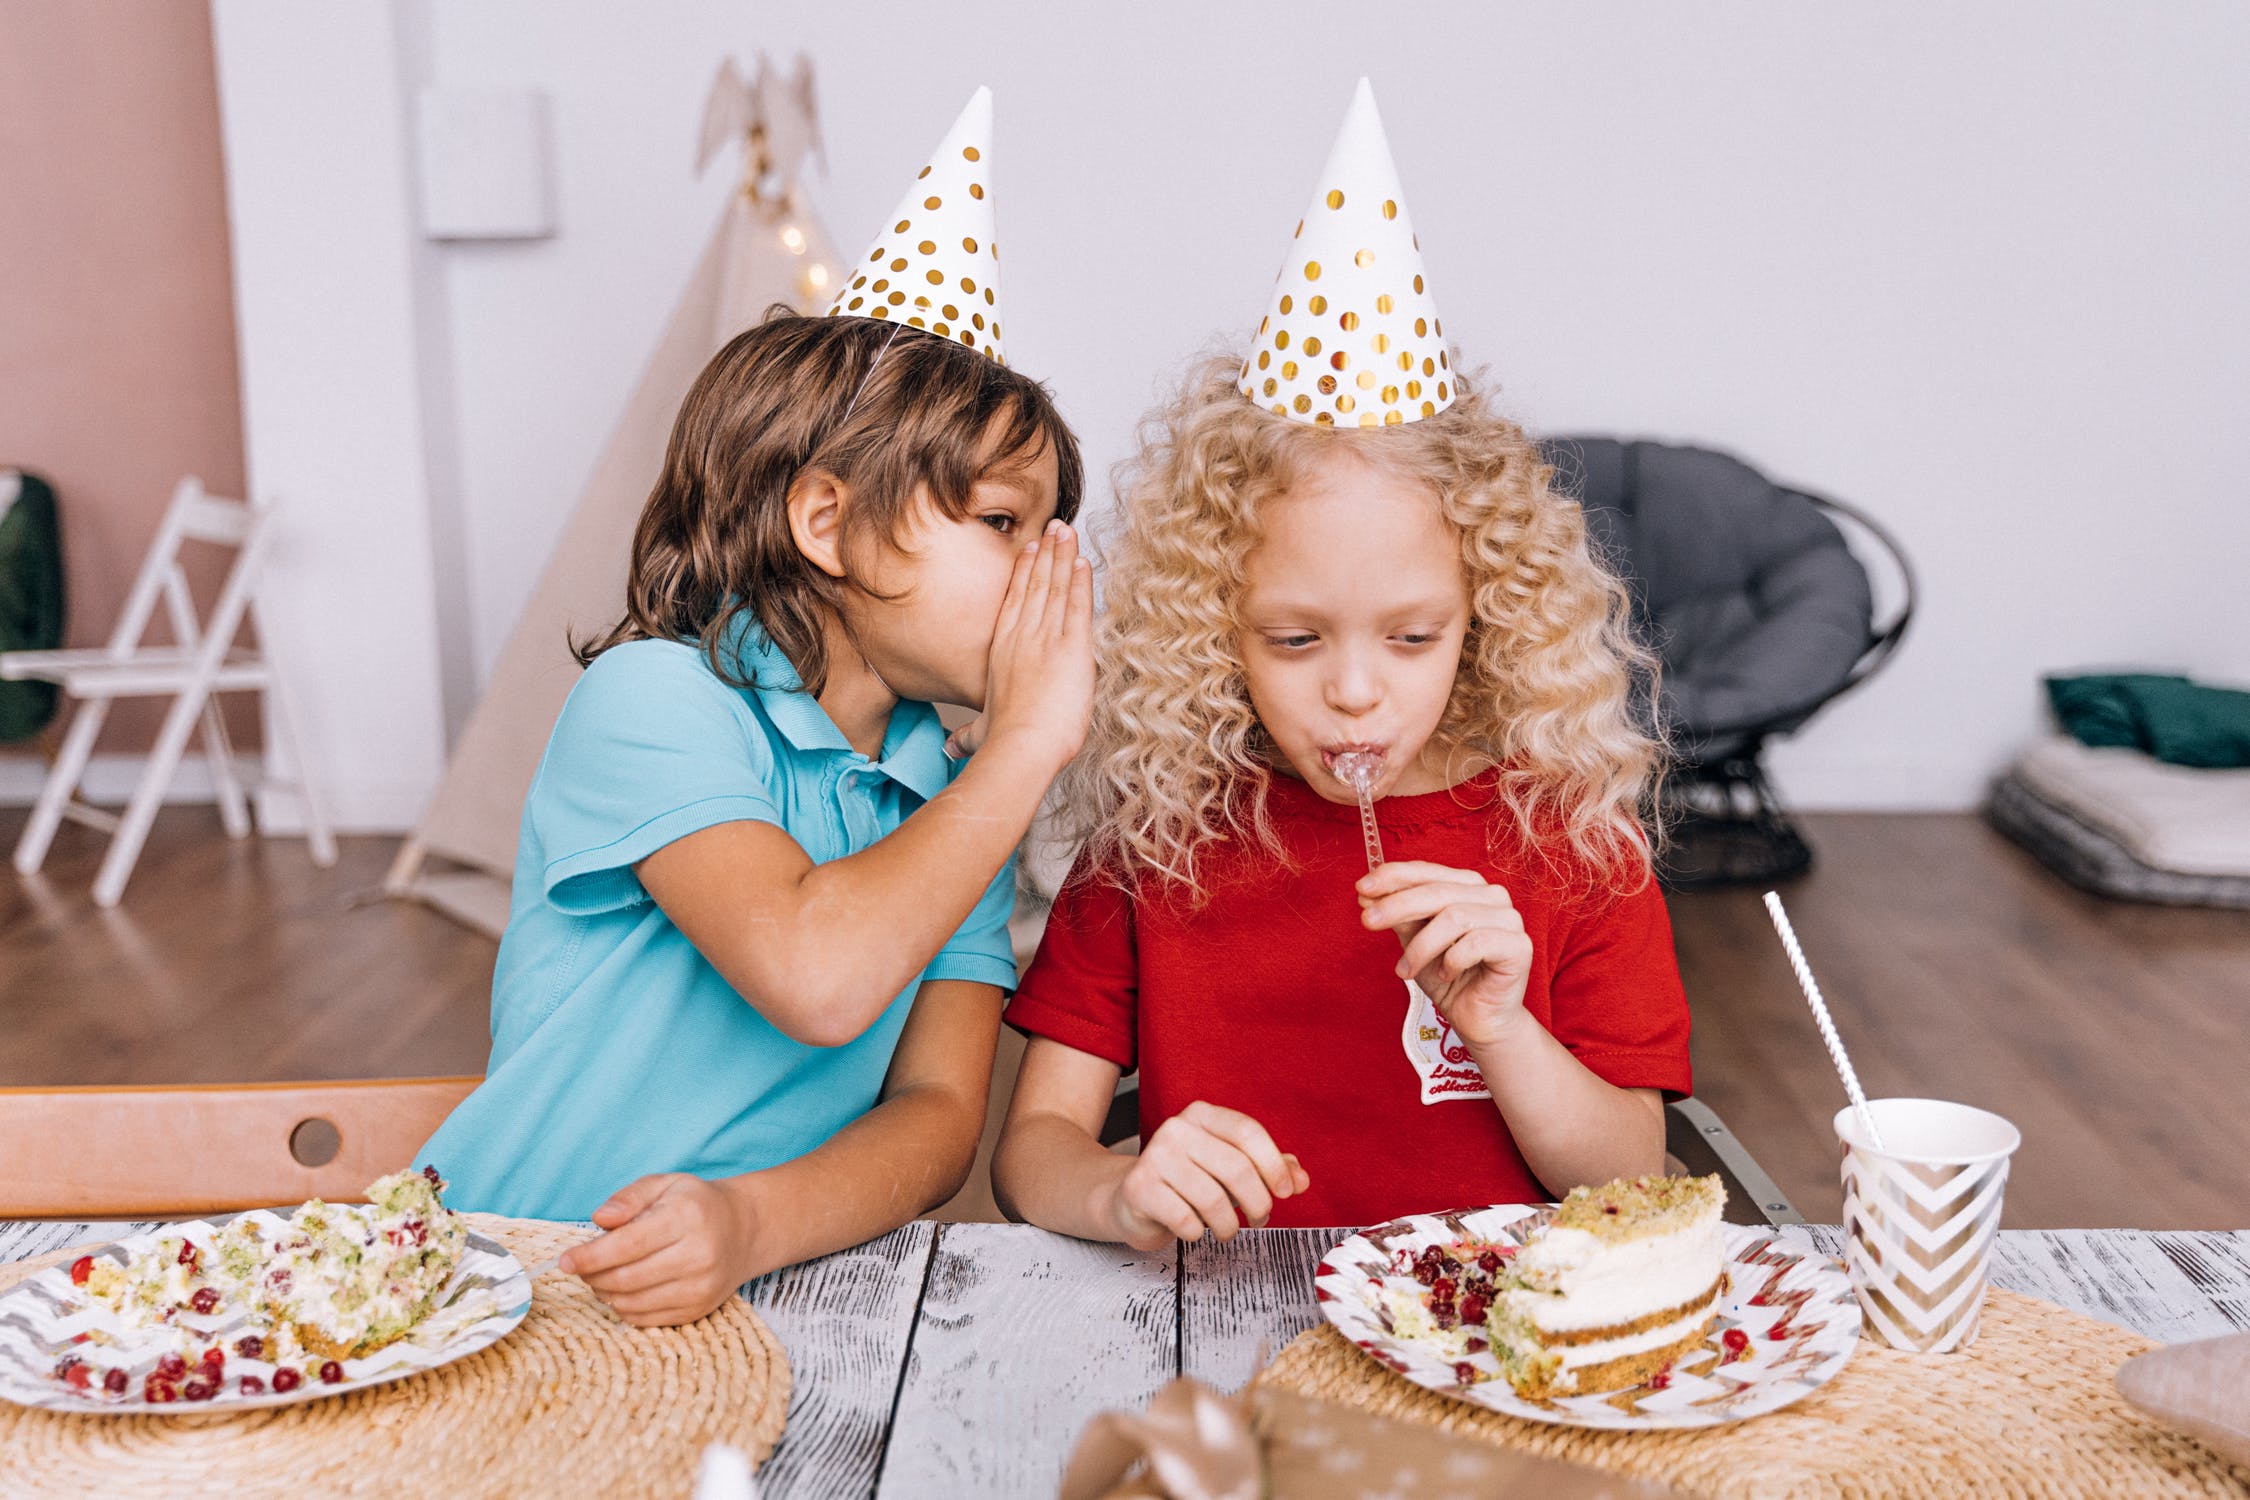 Children's Party Tips  image